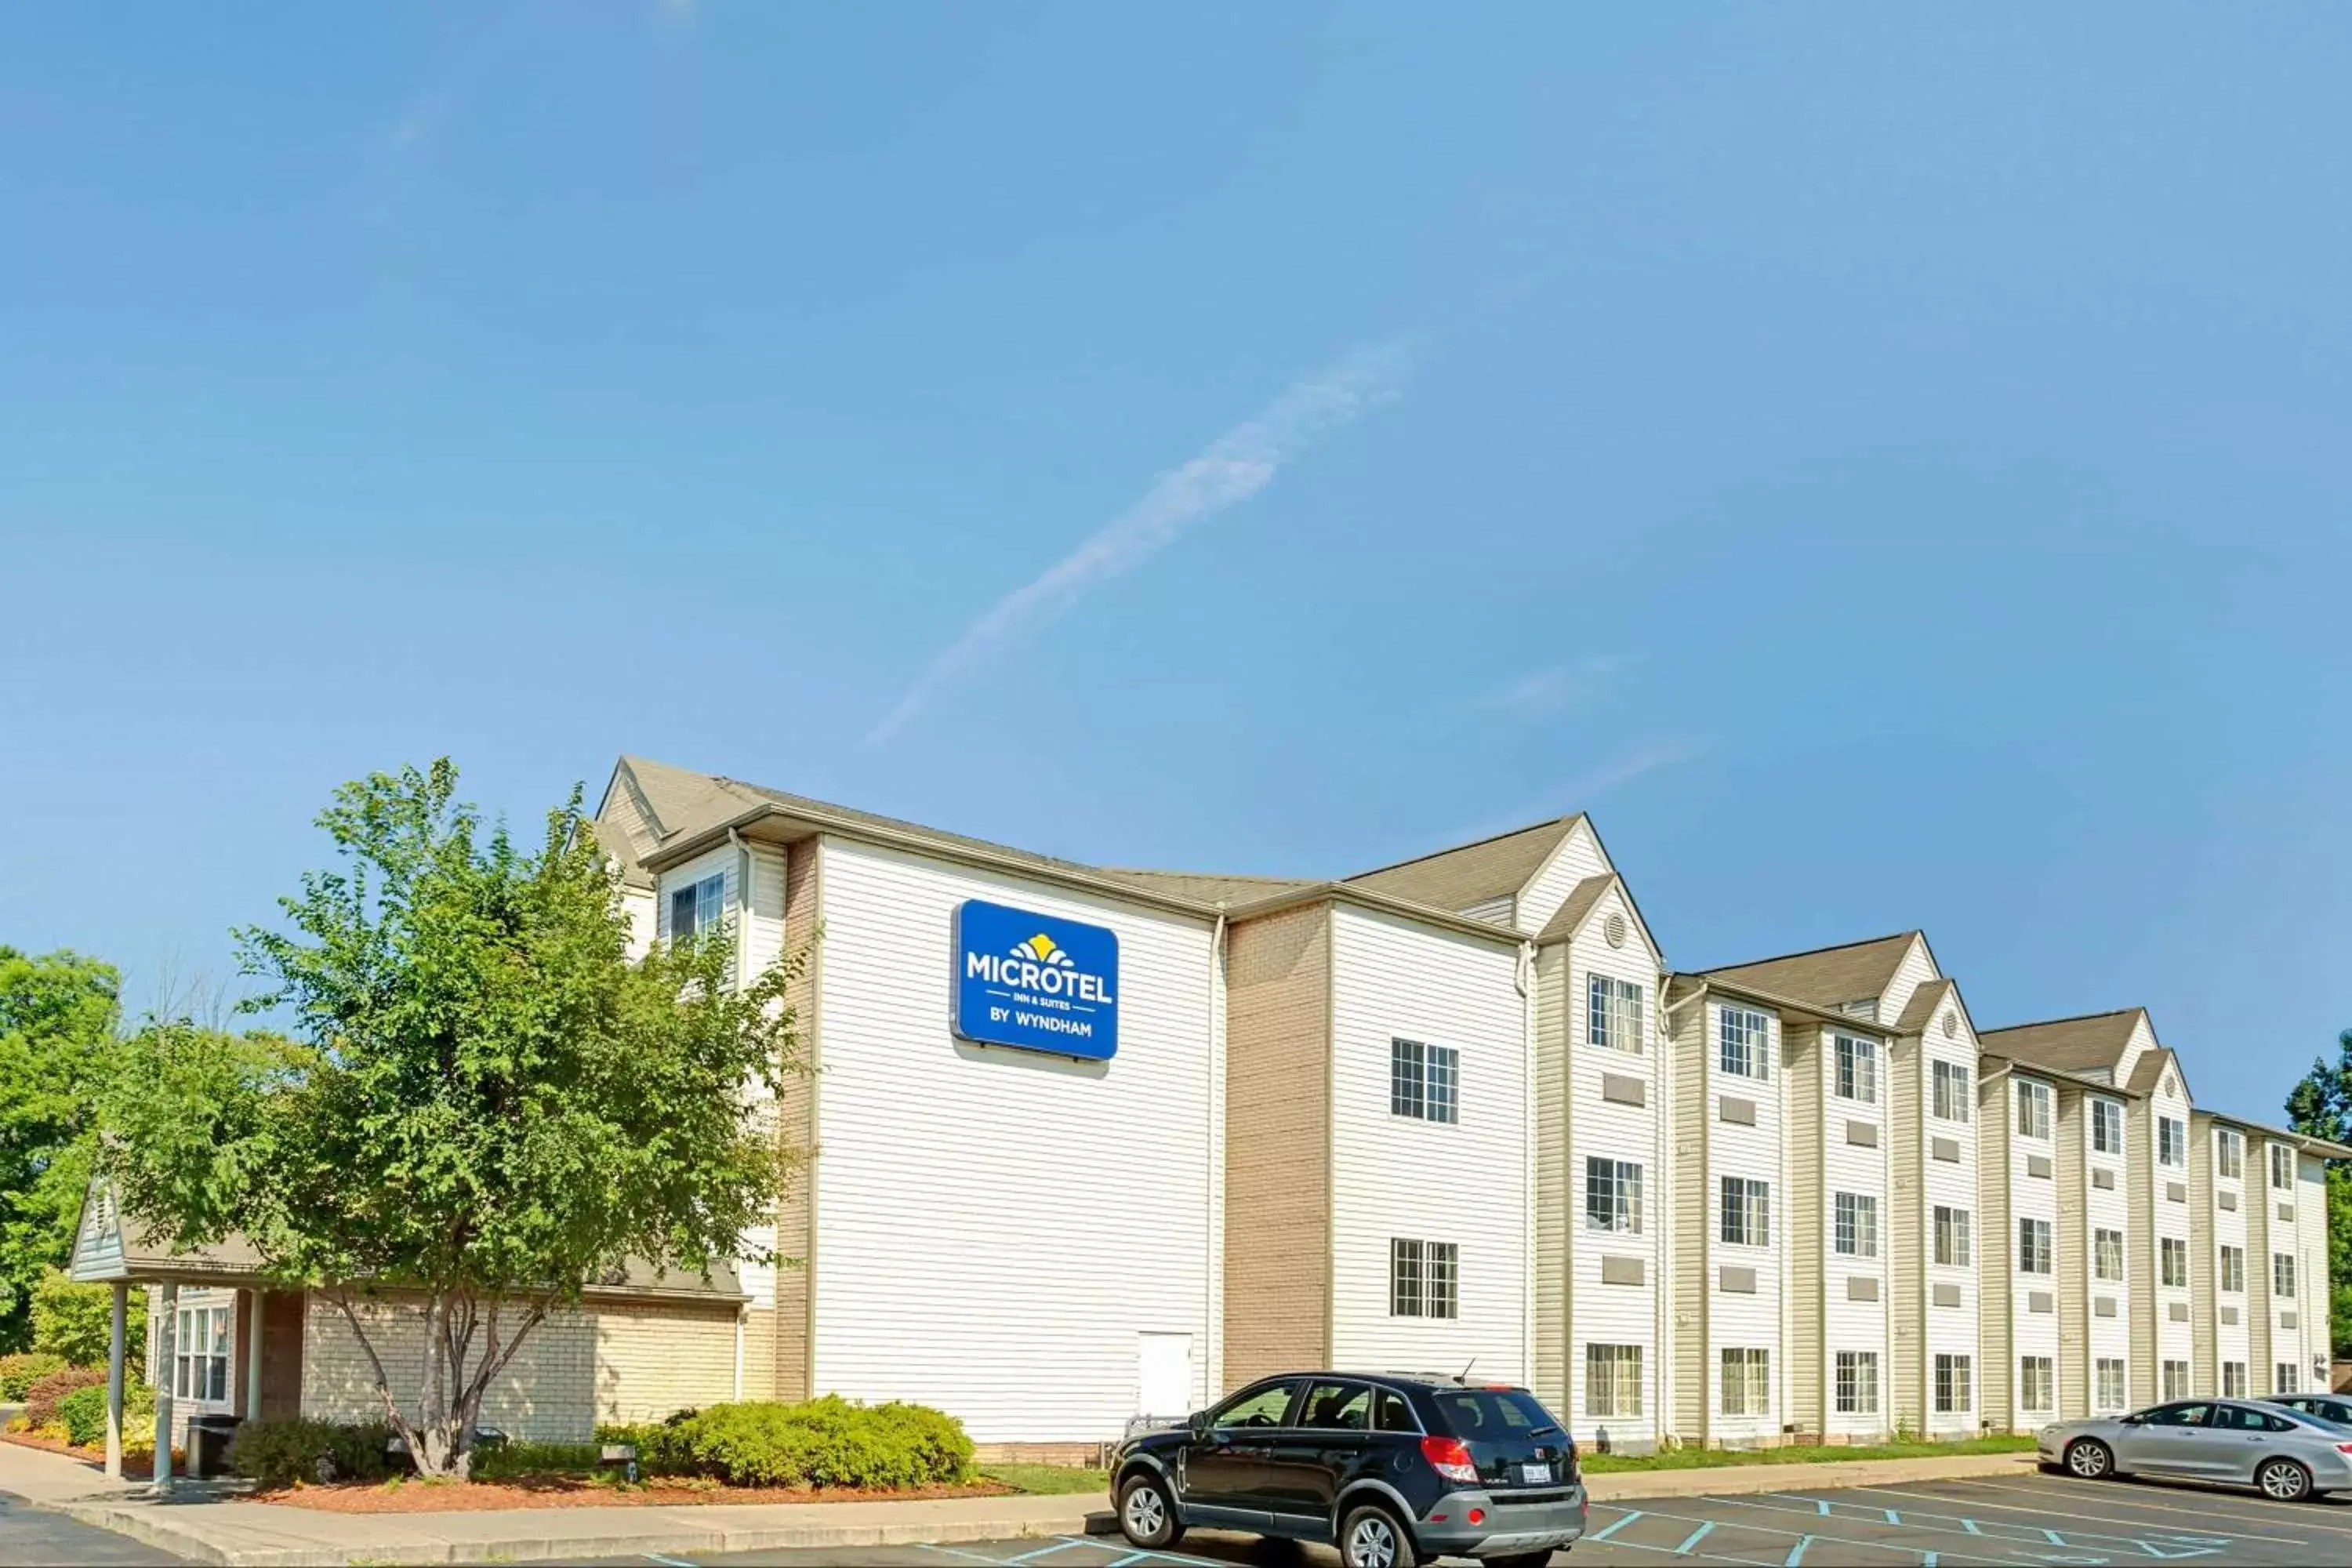 Property Building in Microtel Inn & Suites by Wyndham Detroit Roseville